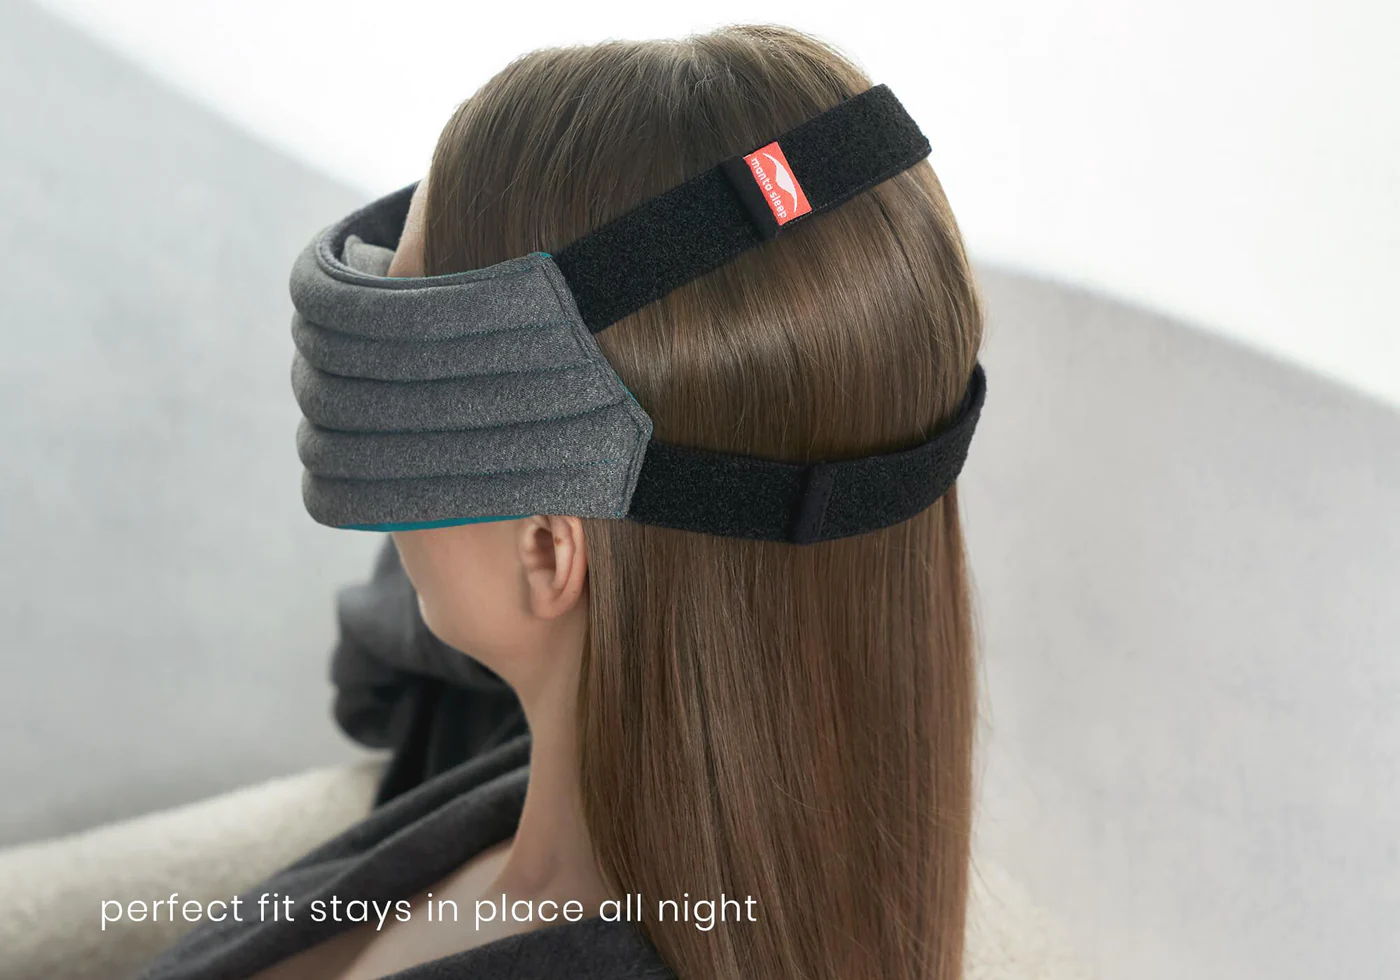 The back of a girl's head wearing a pressure eye mask with two bands encircling her head.